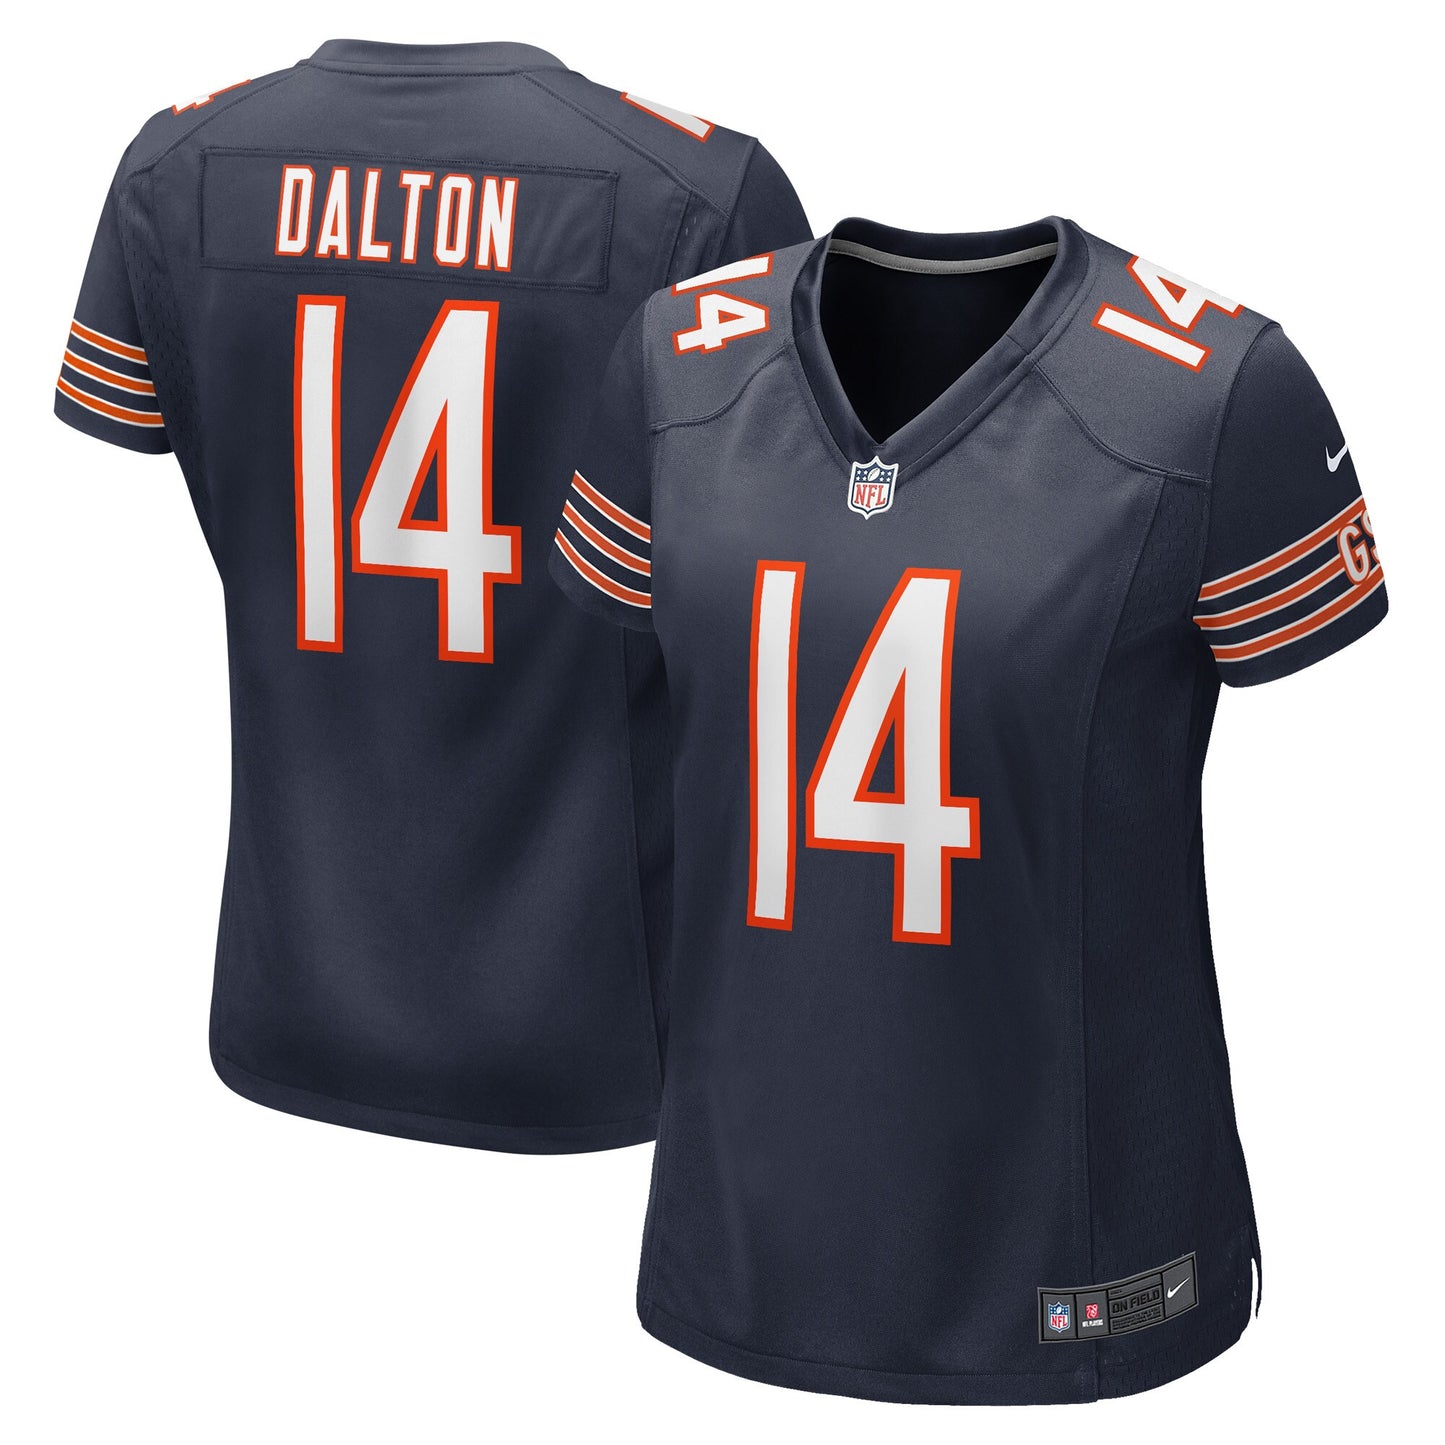 Andy Dalton Chicago Bears Nike Women's Game Player Jersey - Navy